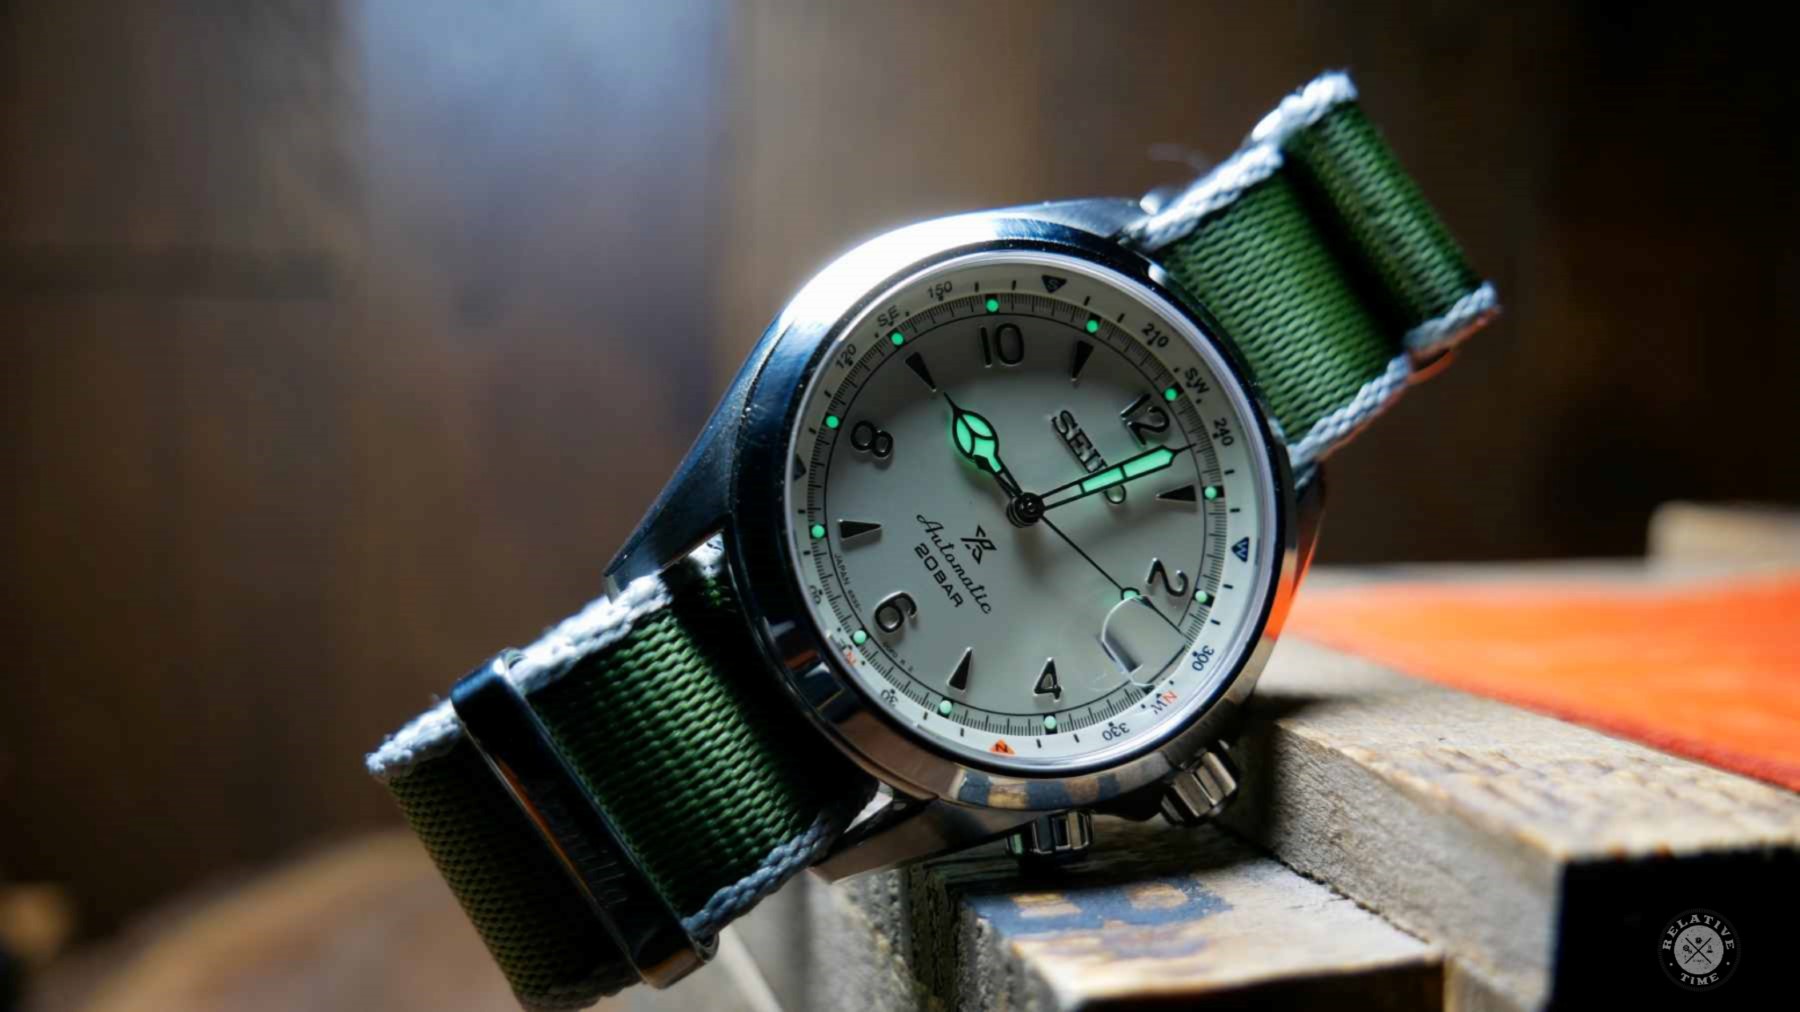 Giving Into The Ghost: 2020 Seiko Alpinist Review - Relative Time